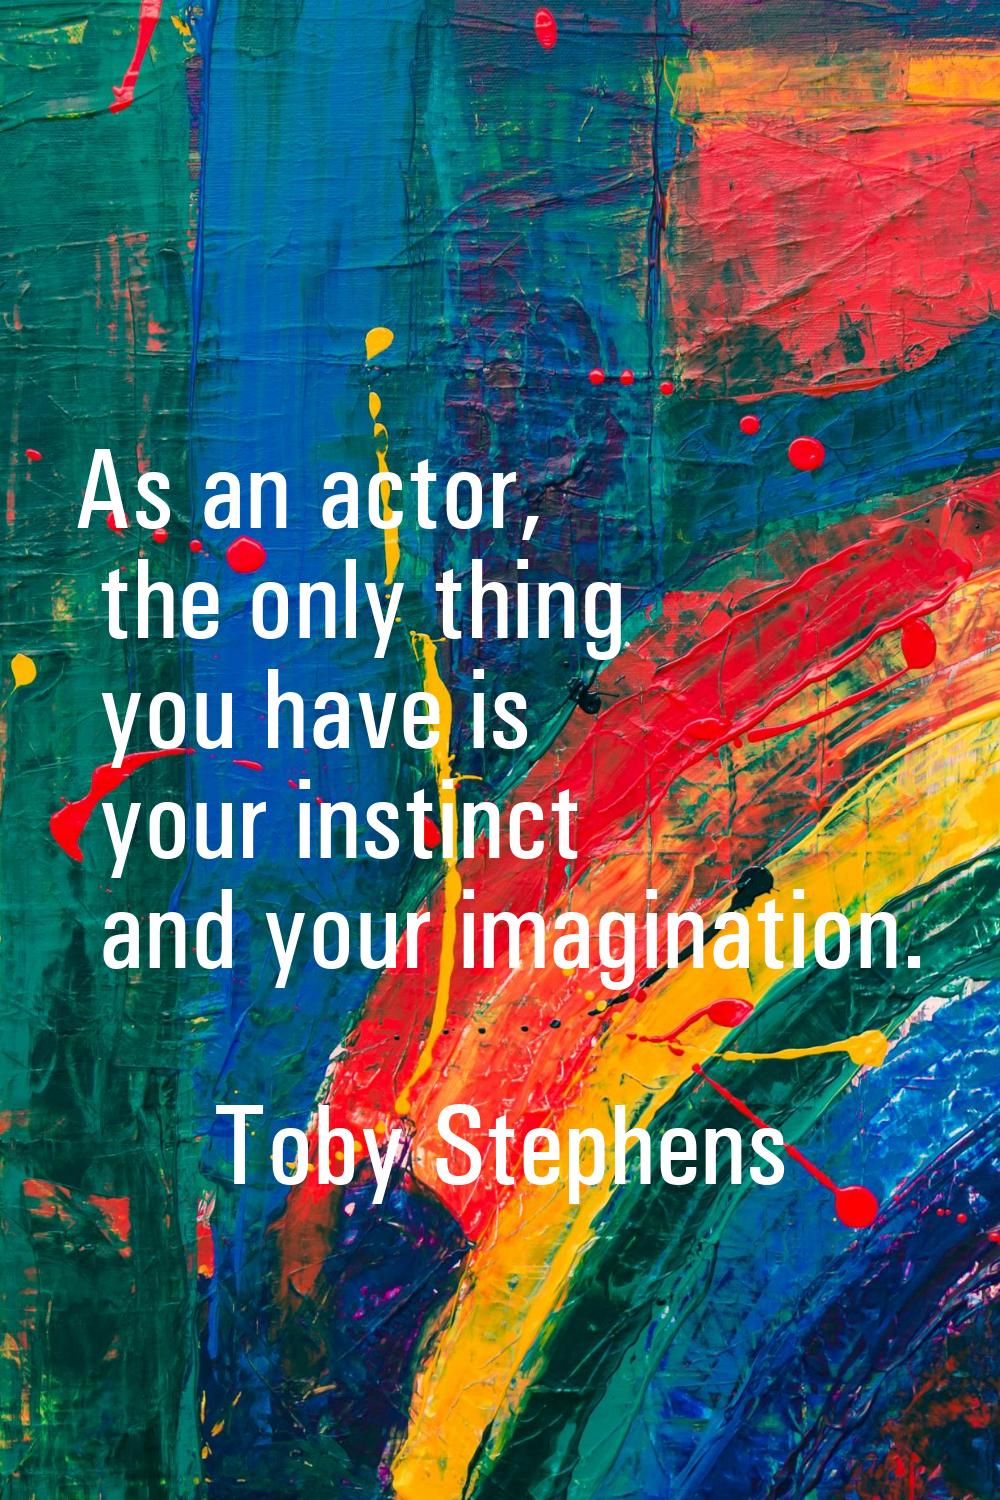 As an actor, the only thing you have is your instinct and your imagination.